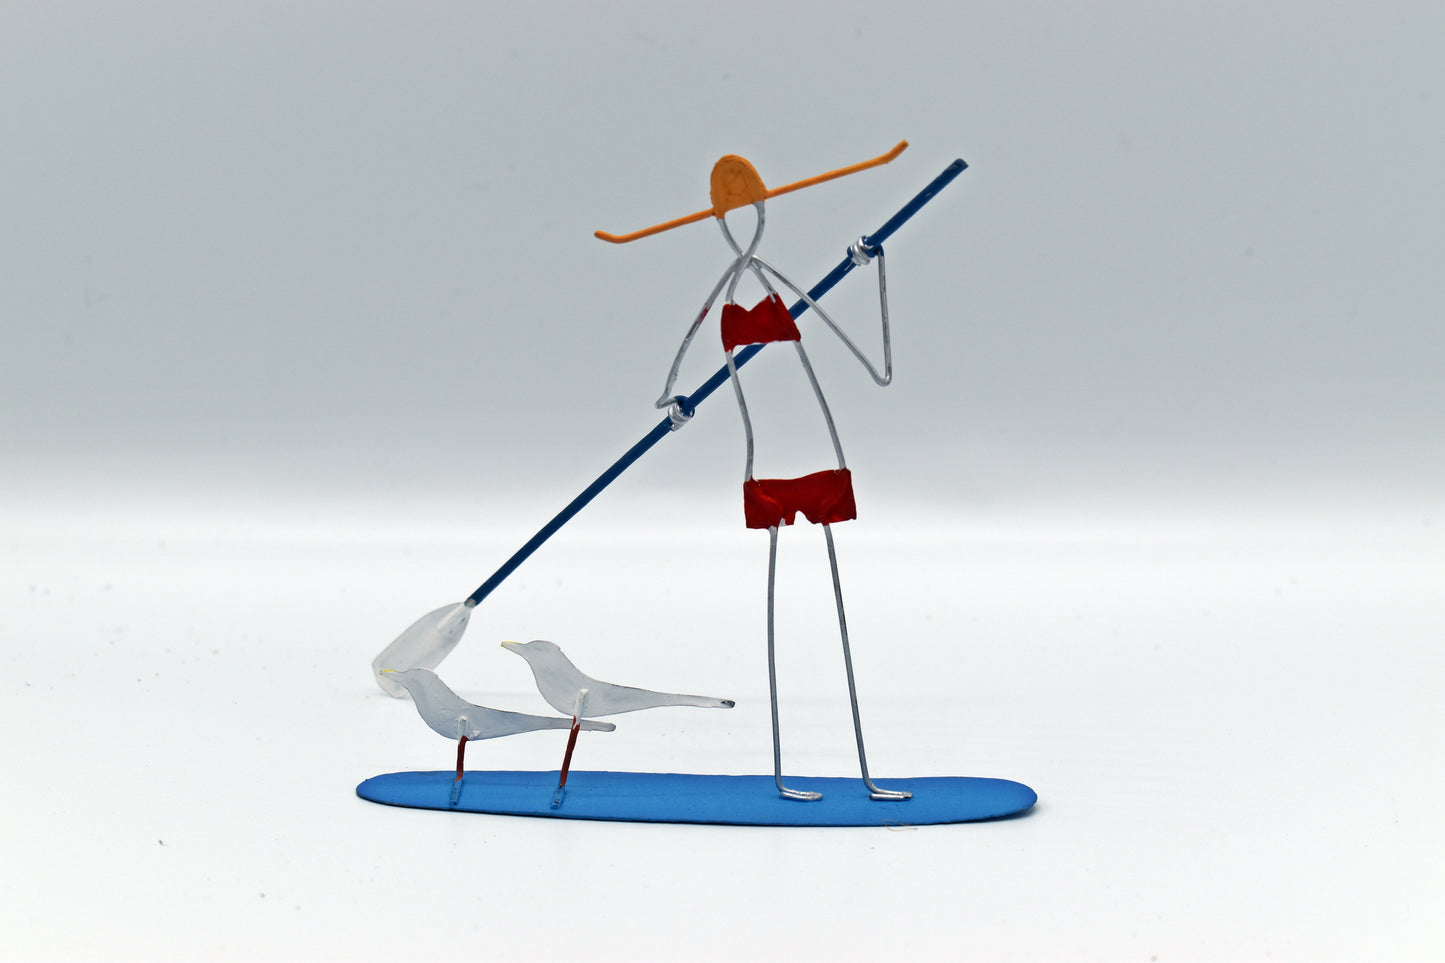 SUPS Girl on a Paddleboard small funky figure Lets SUP